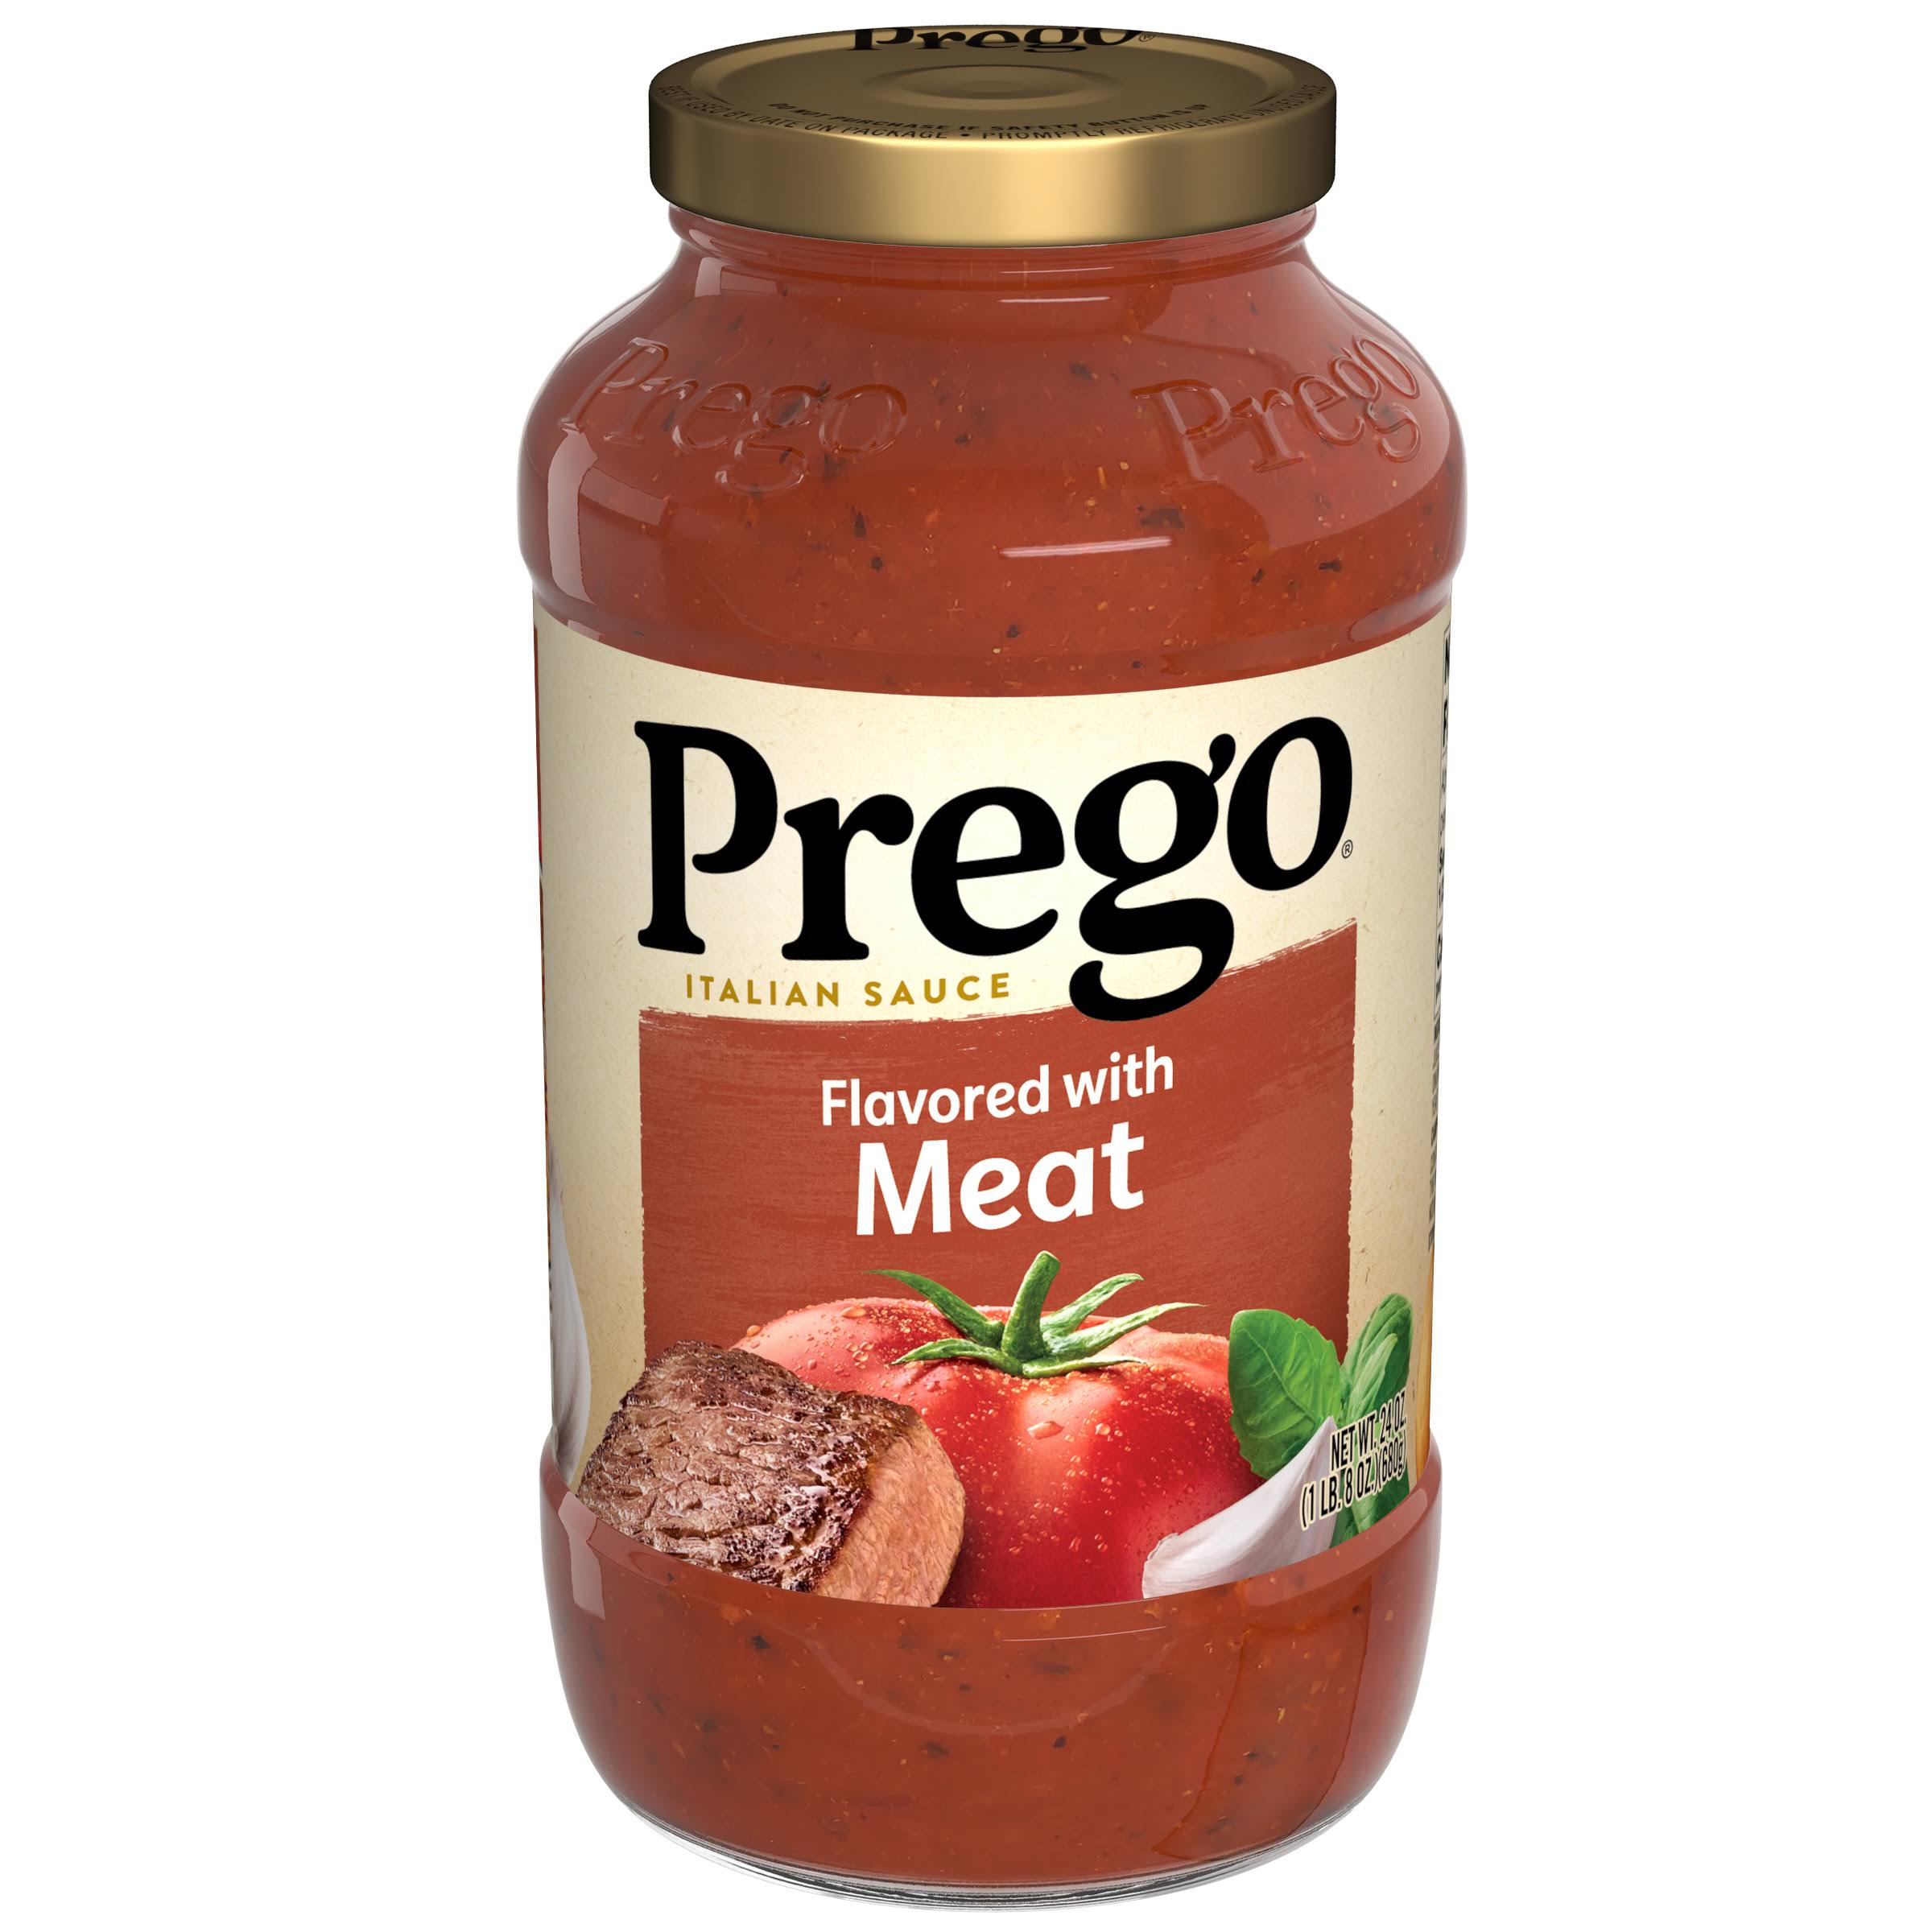 Prego Flavored with Meat Italian Sauce - 24oz